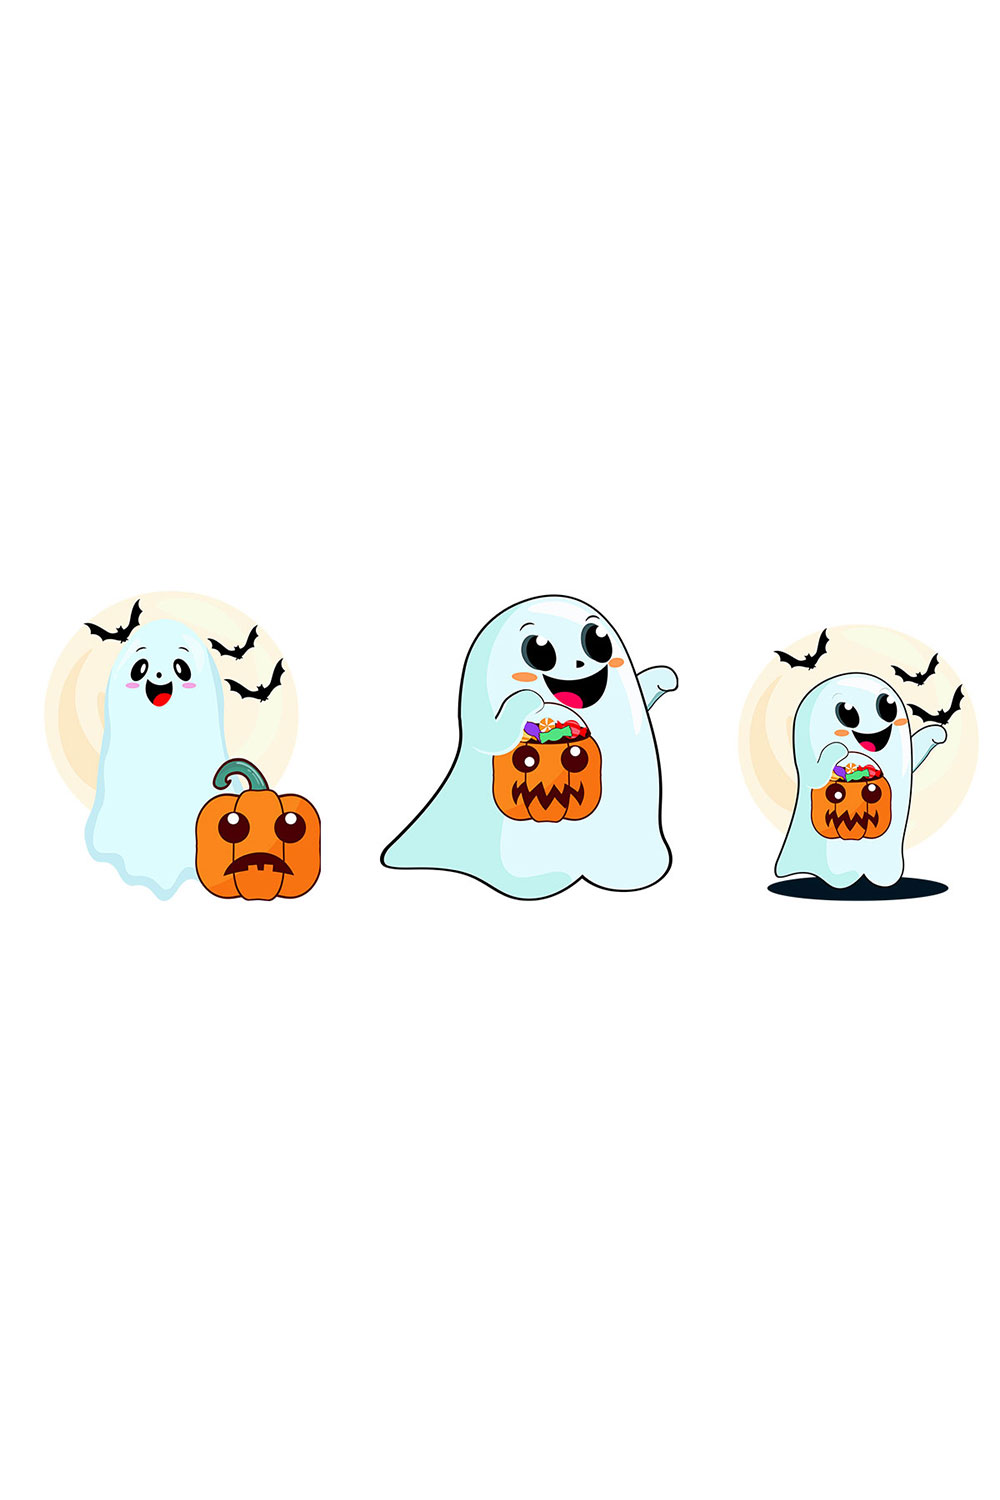 ghosts clipart